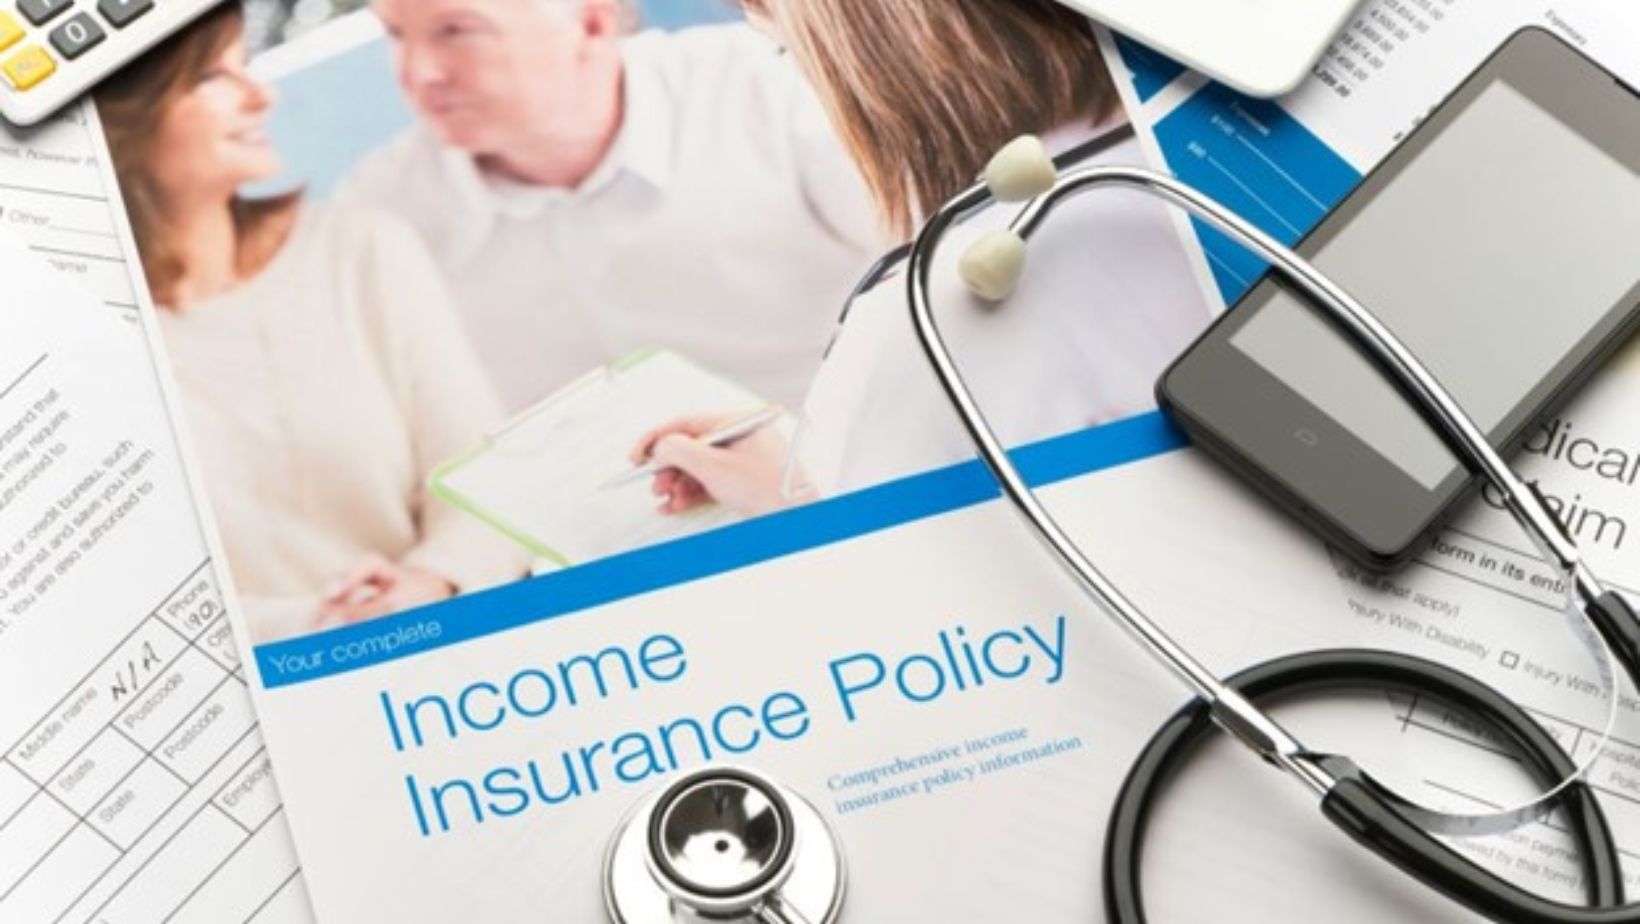 an insured owns an individual disability income policy